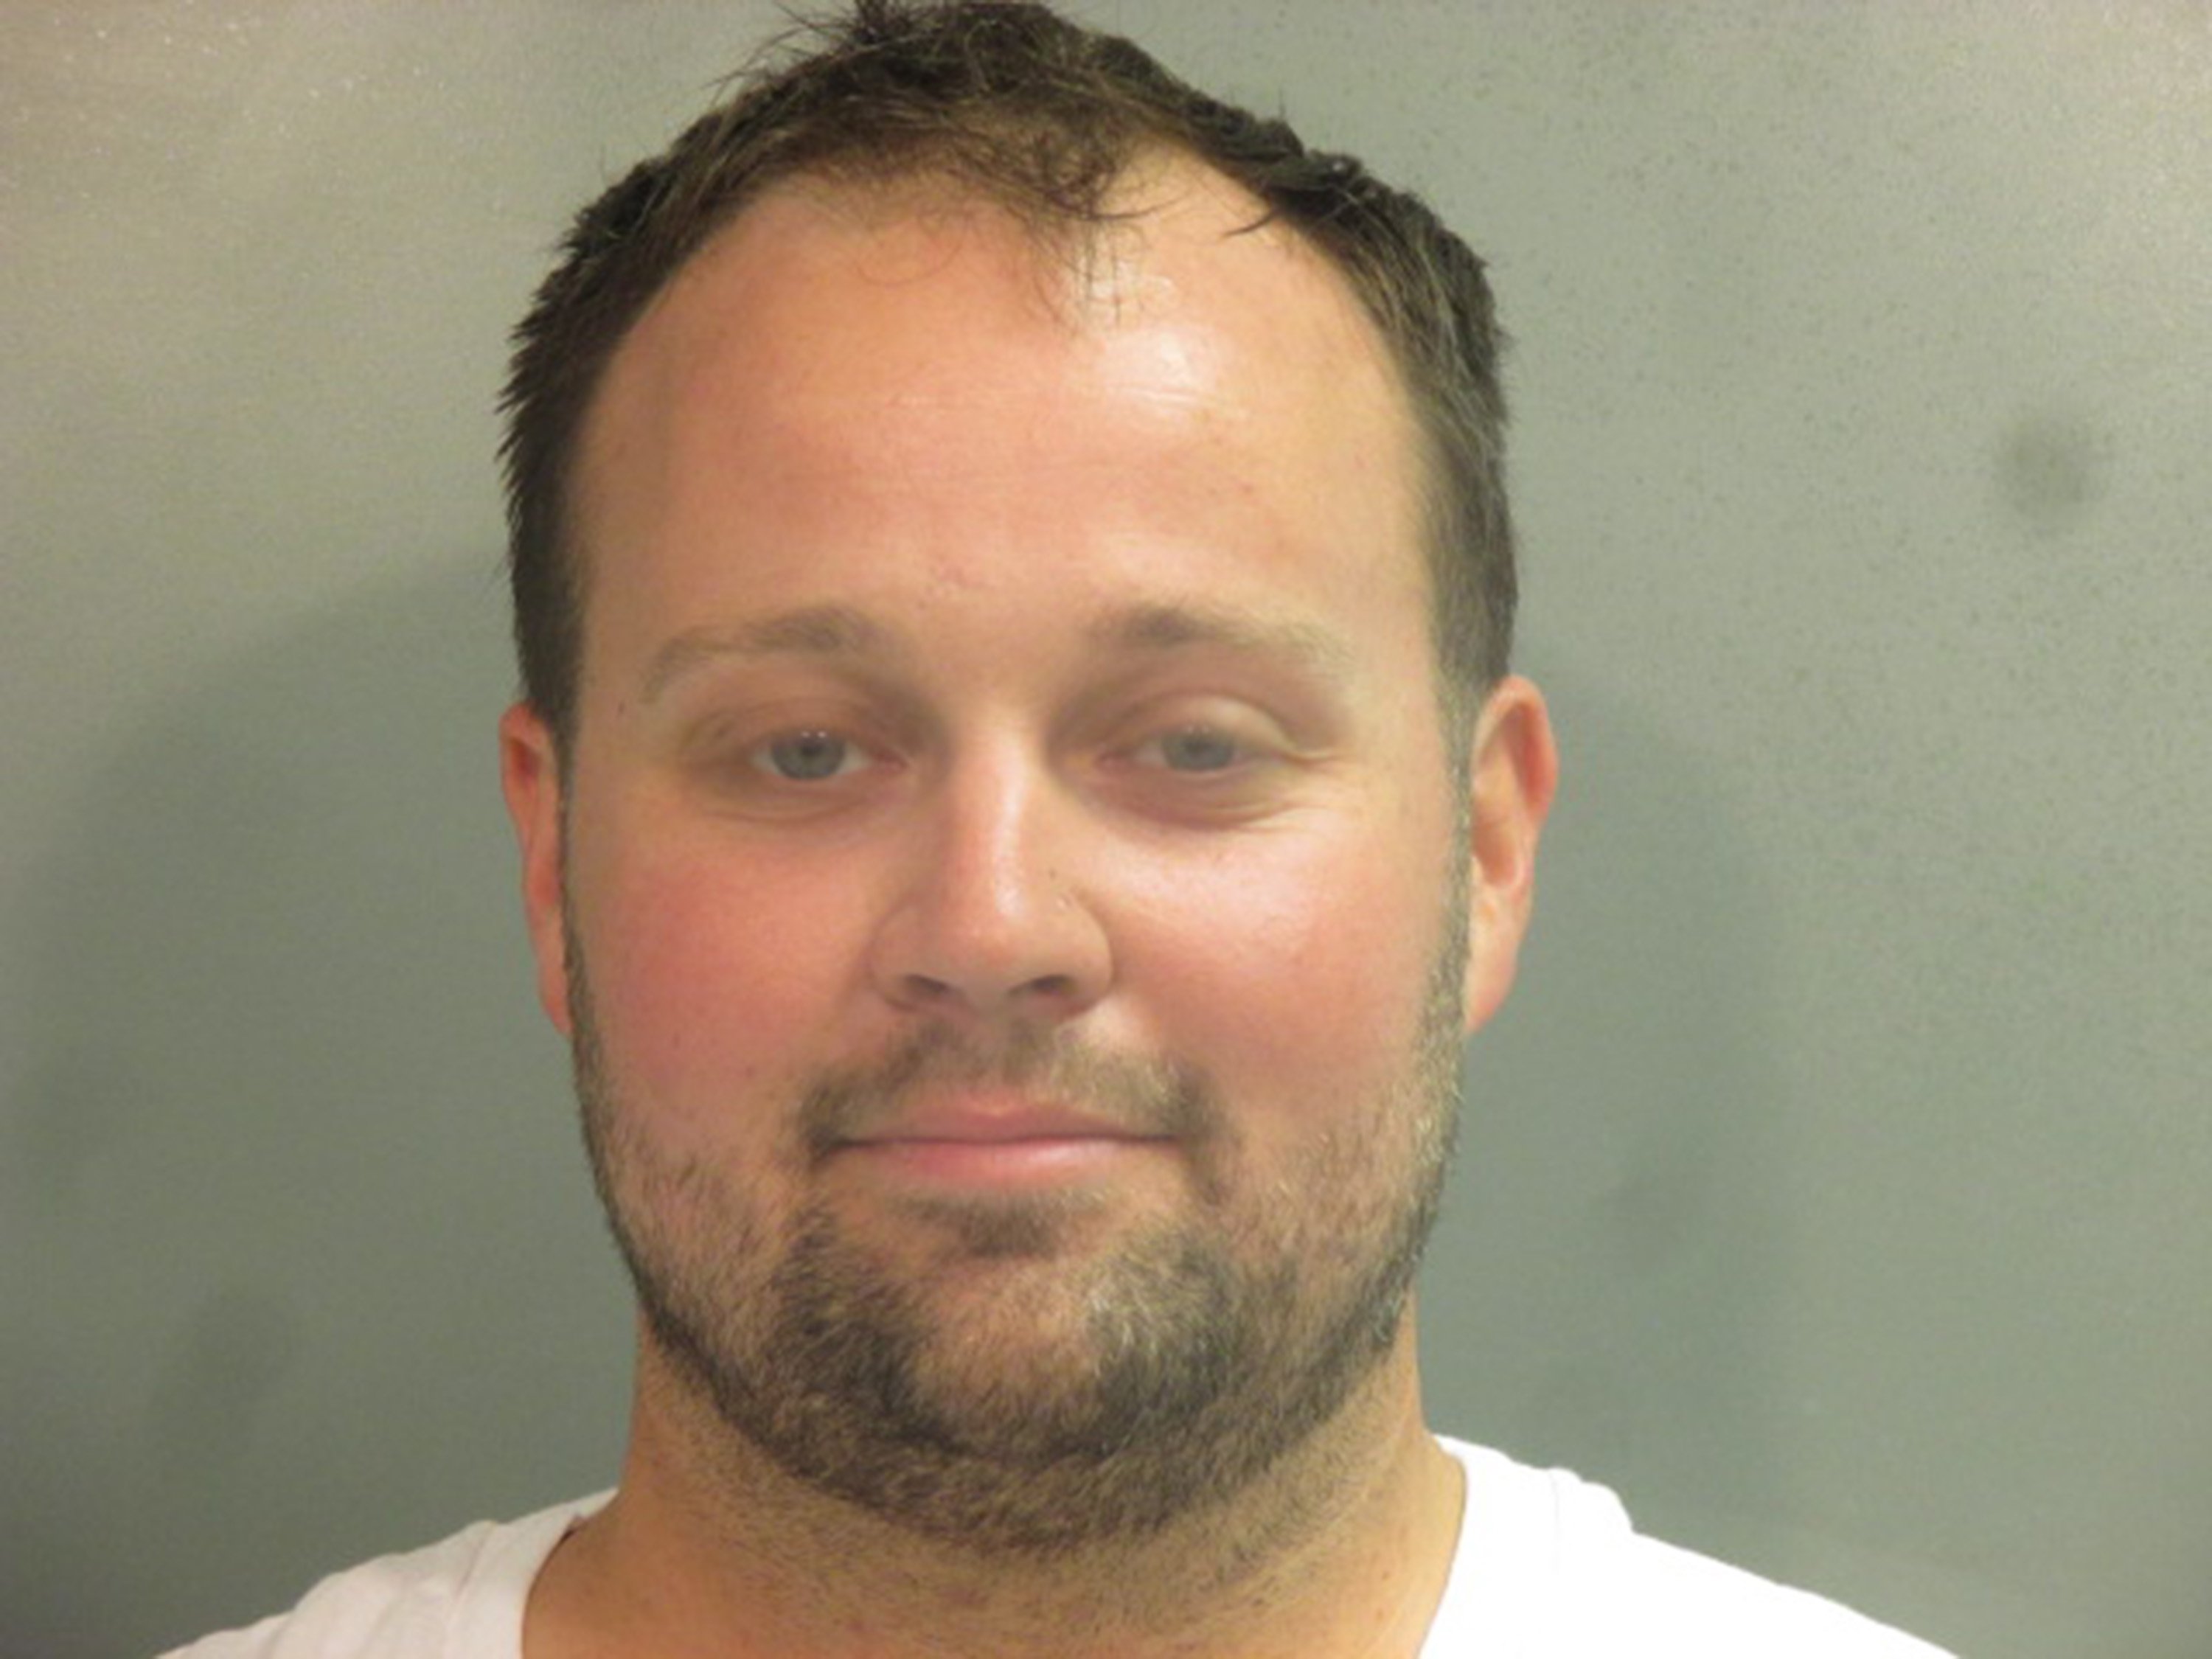 Josh Duggar's mugshot from his april 2021 arrest. Josh Duggar's trial concluded on Dec. 9. He was found guilty